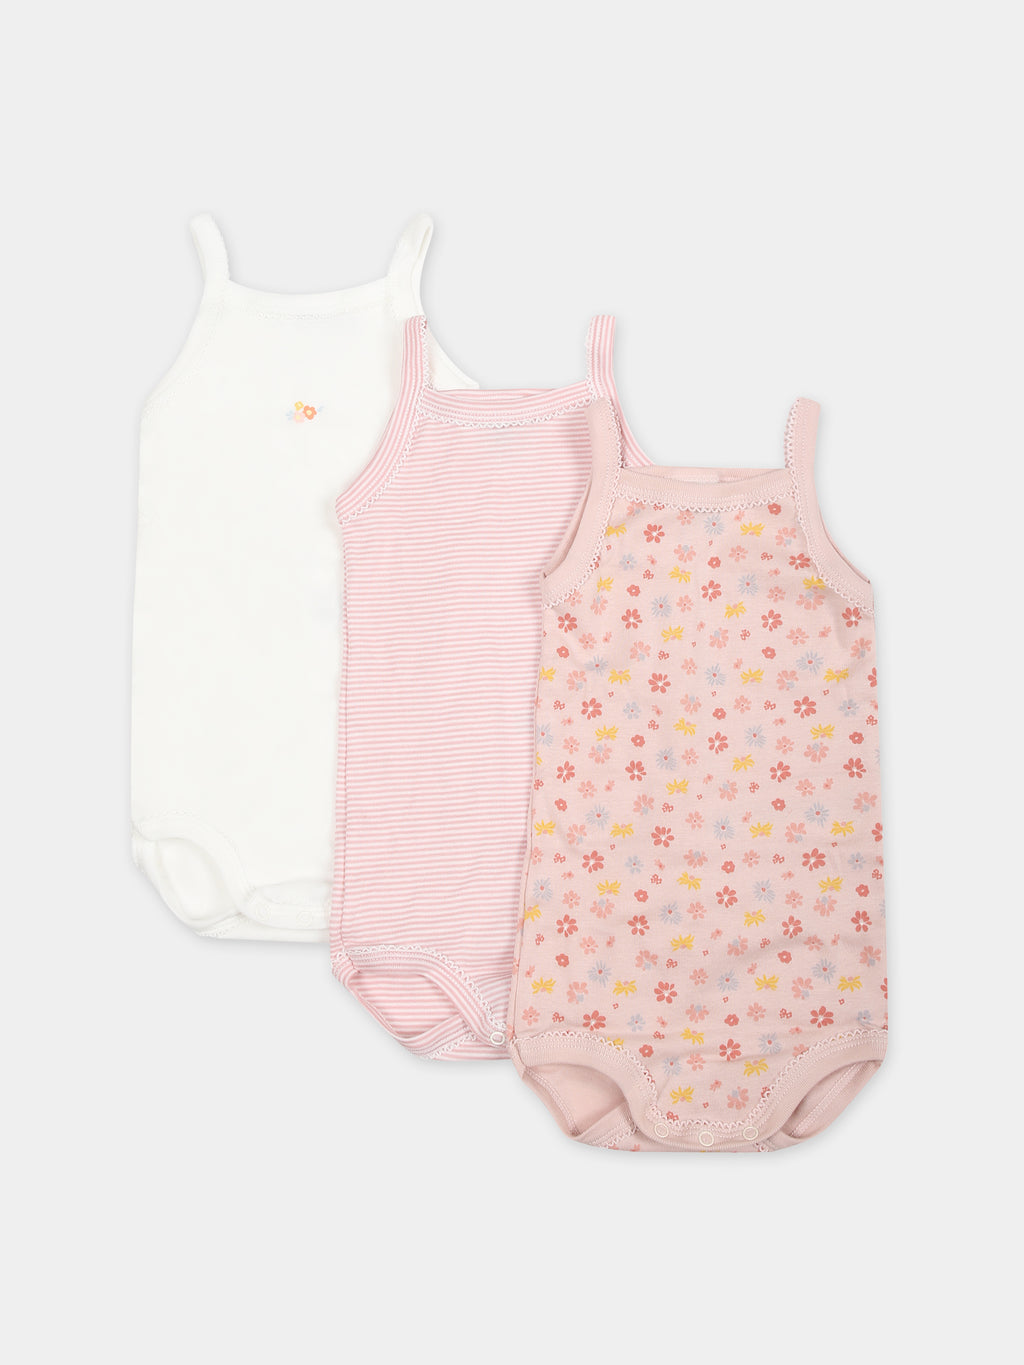 Multicolor set for baby girl with flowers and stripes